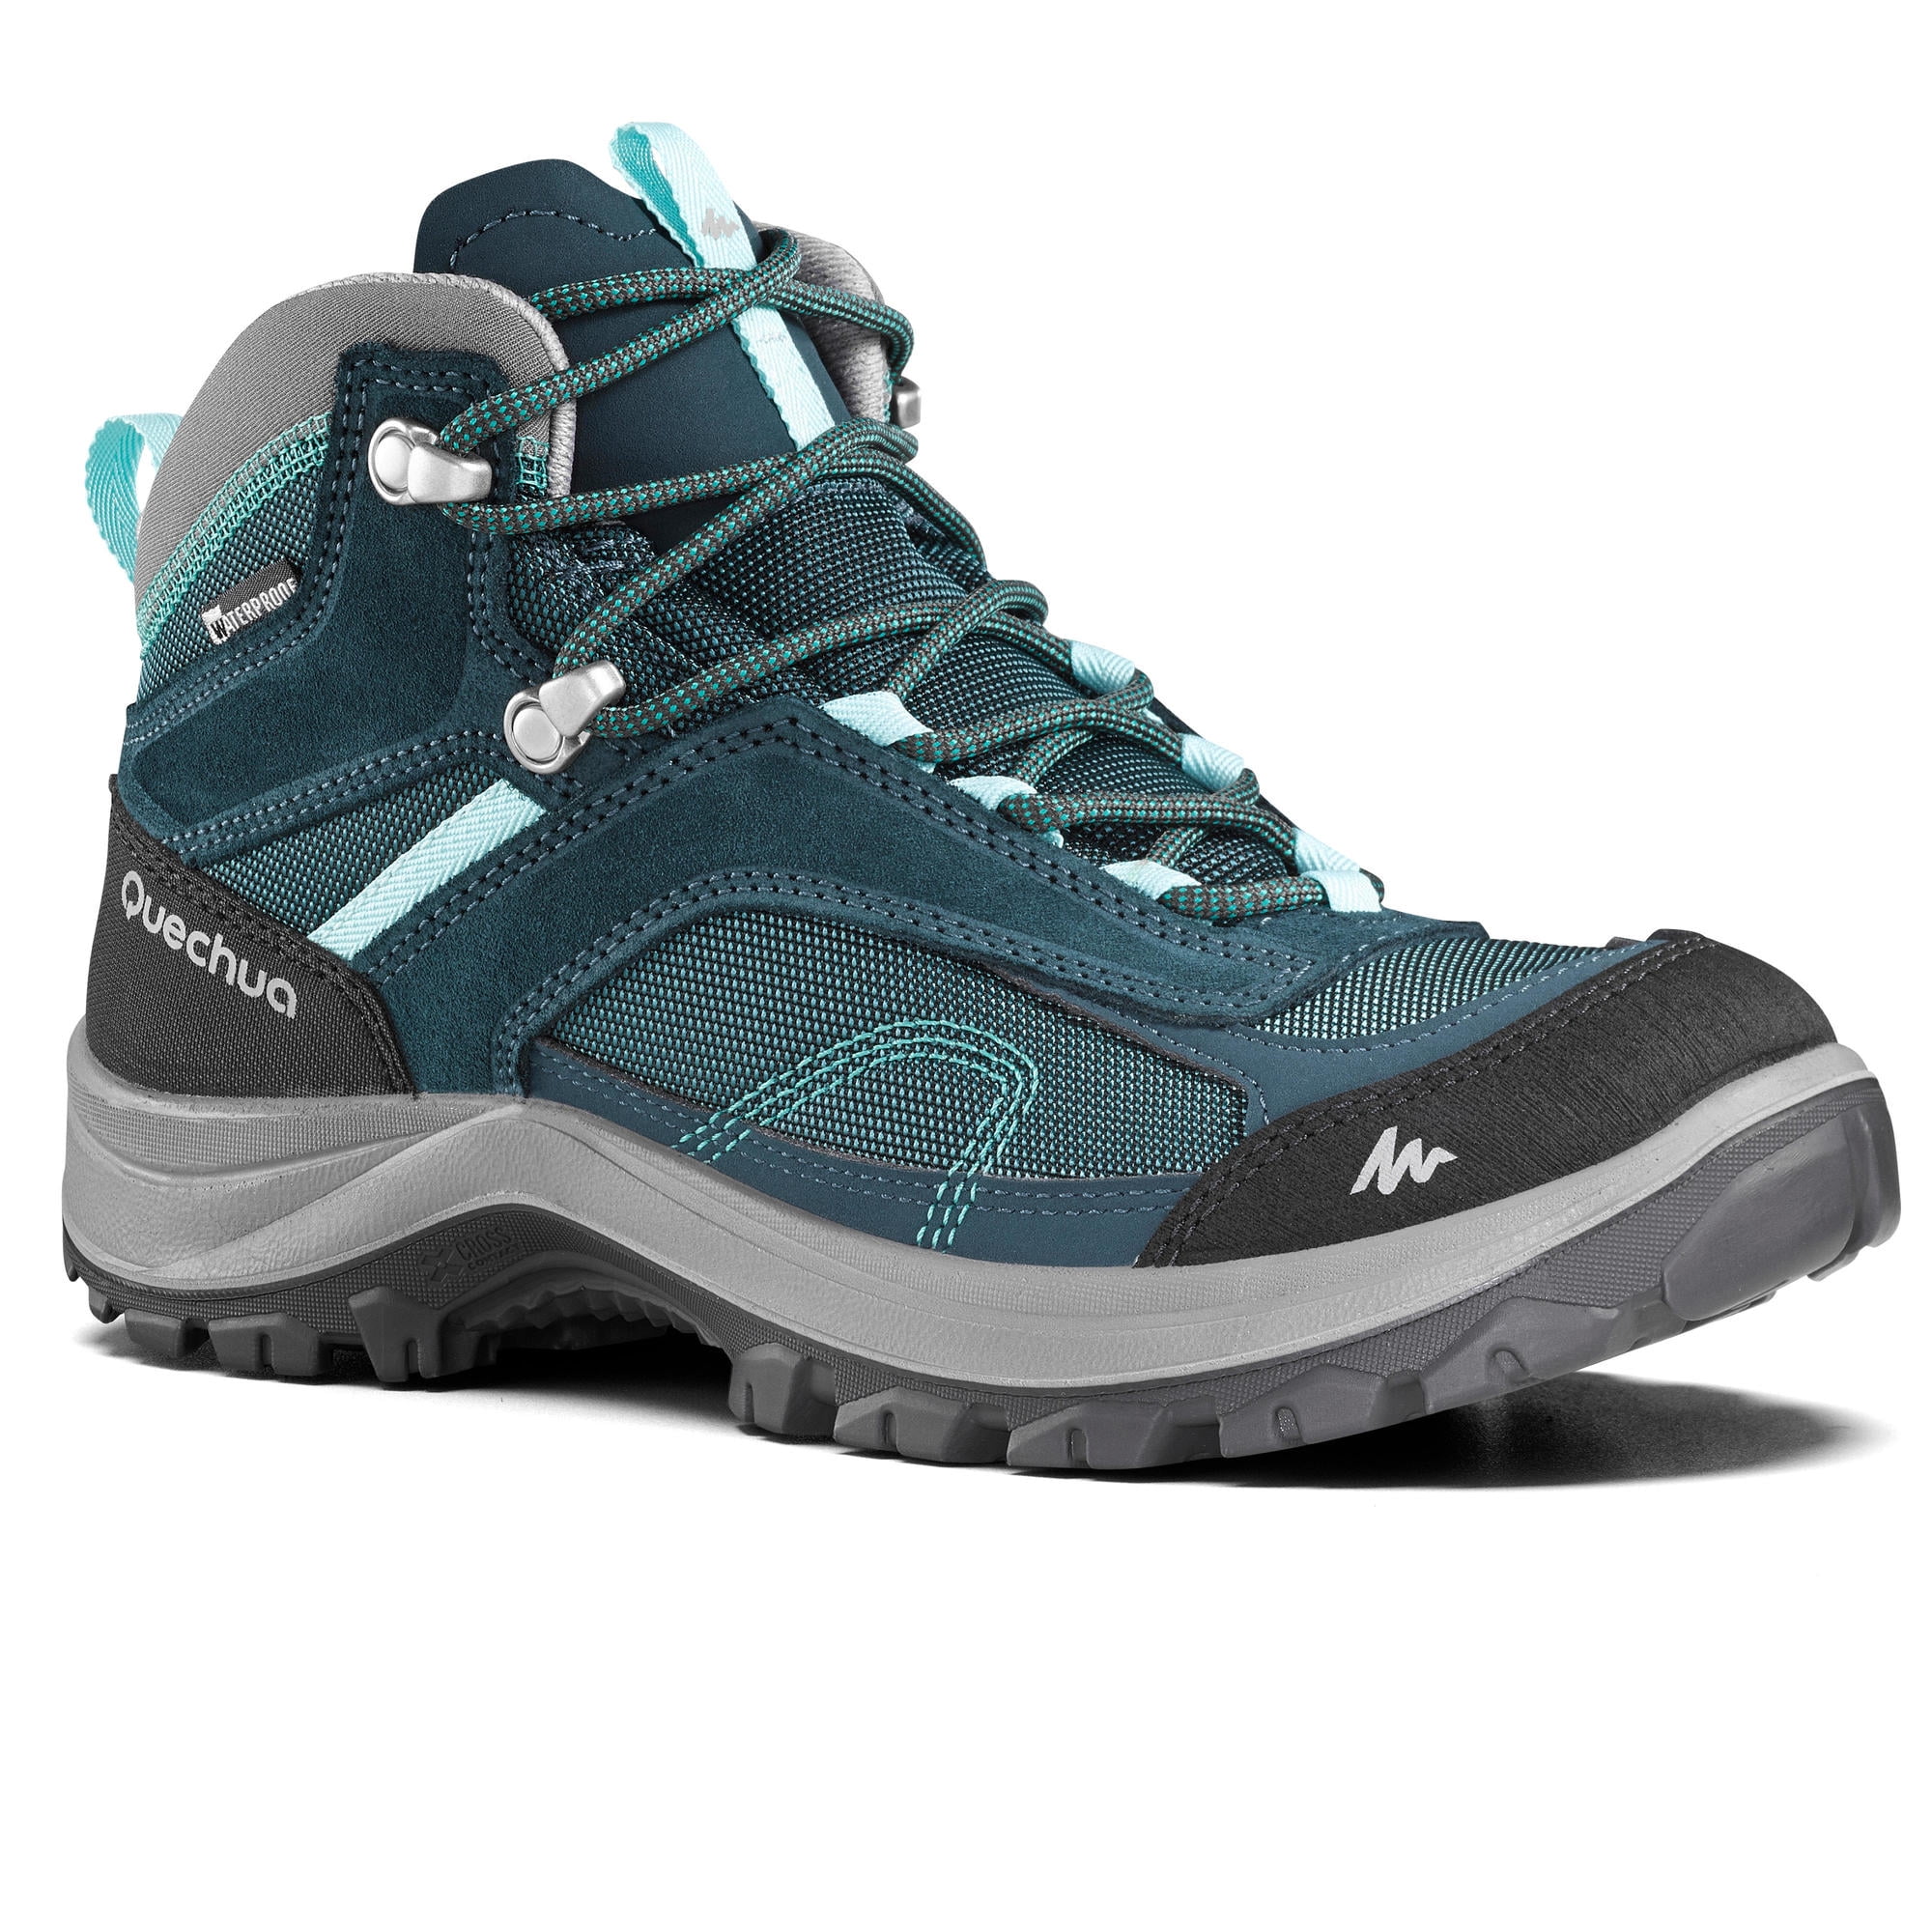 MH100 Mid Waterproof Hiking Shoes 